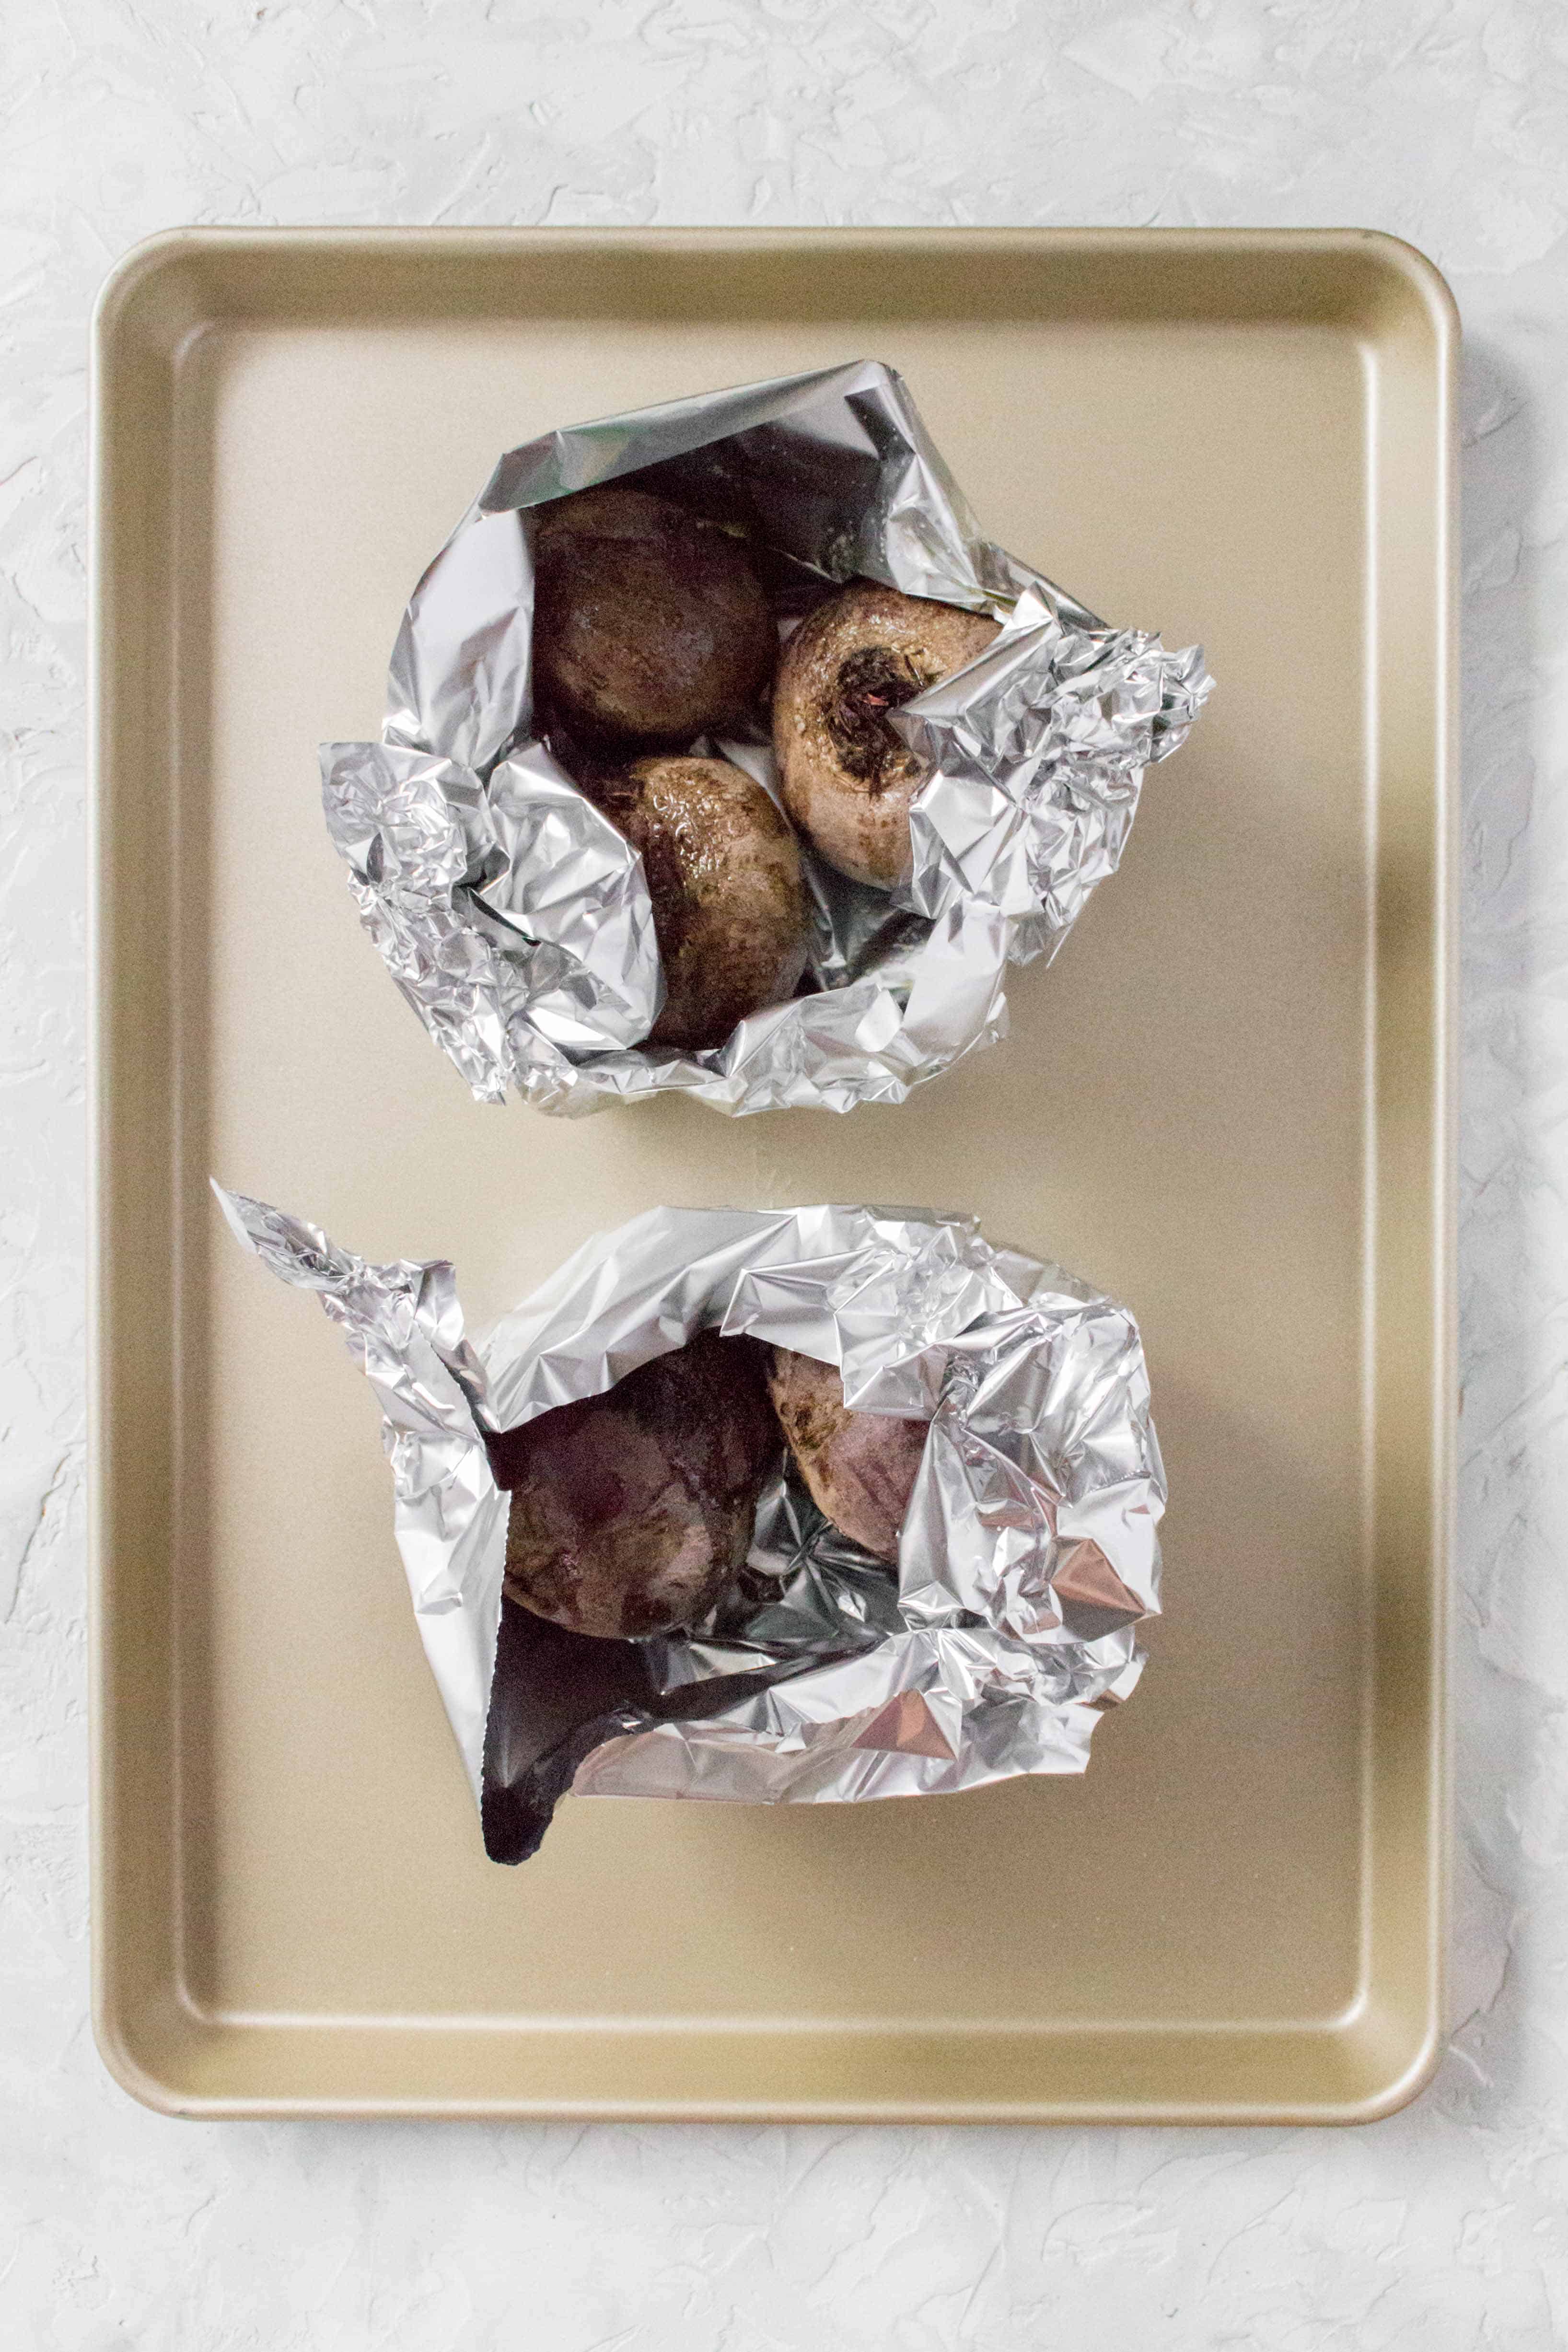 Wondering how to perfectly roast beets for meal prep or as a side dish? Here's how to do it.